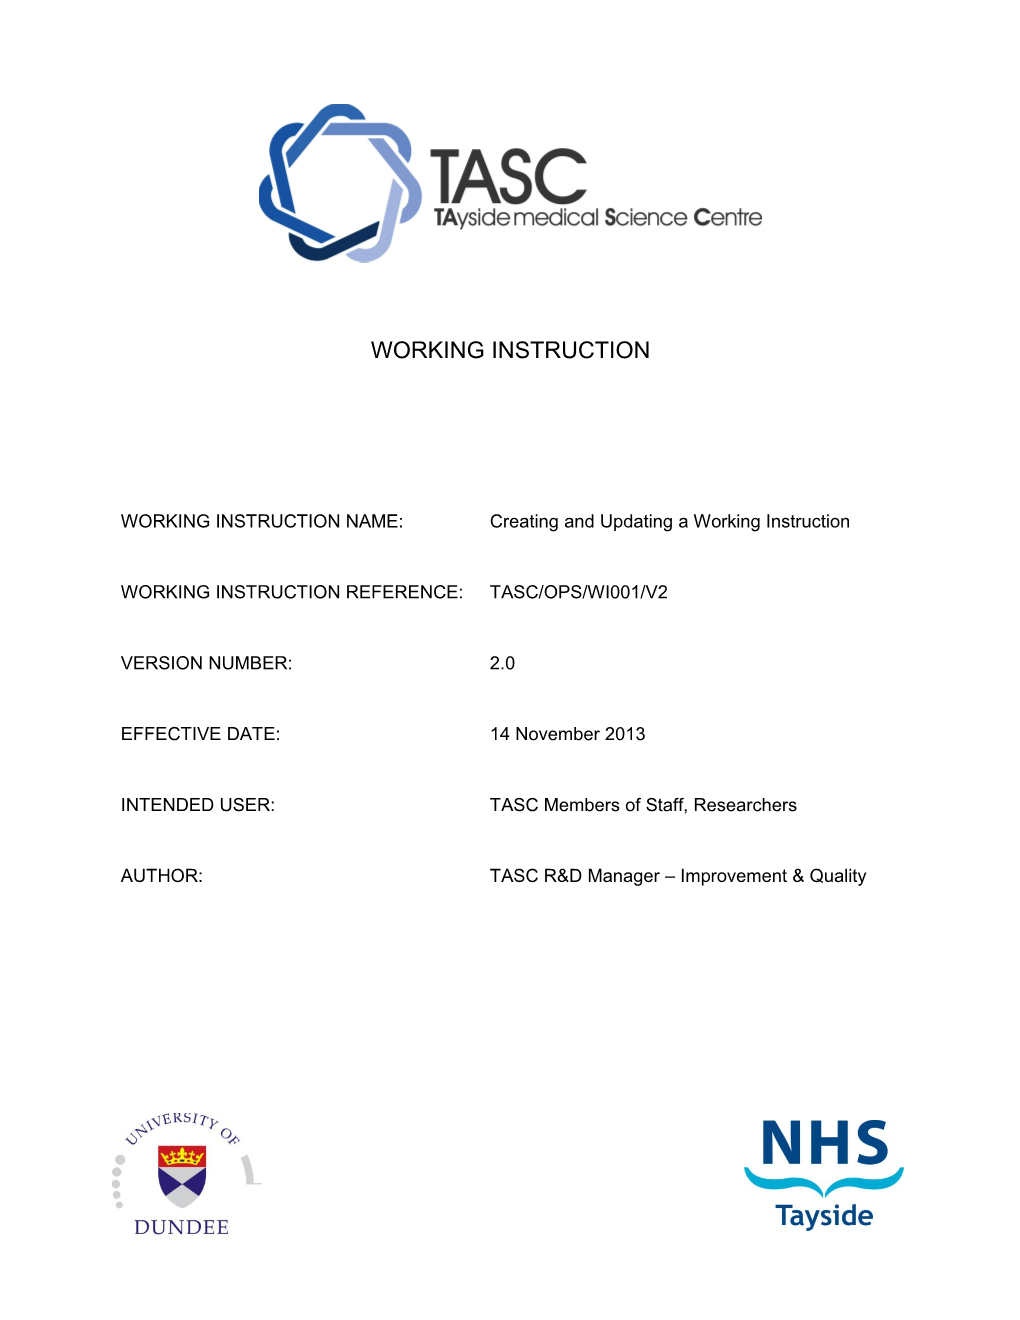 Utilise the Template in Appendix 1, Including Completion of the Front Sheet of the WI Document